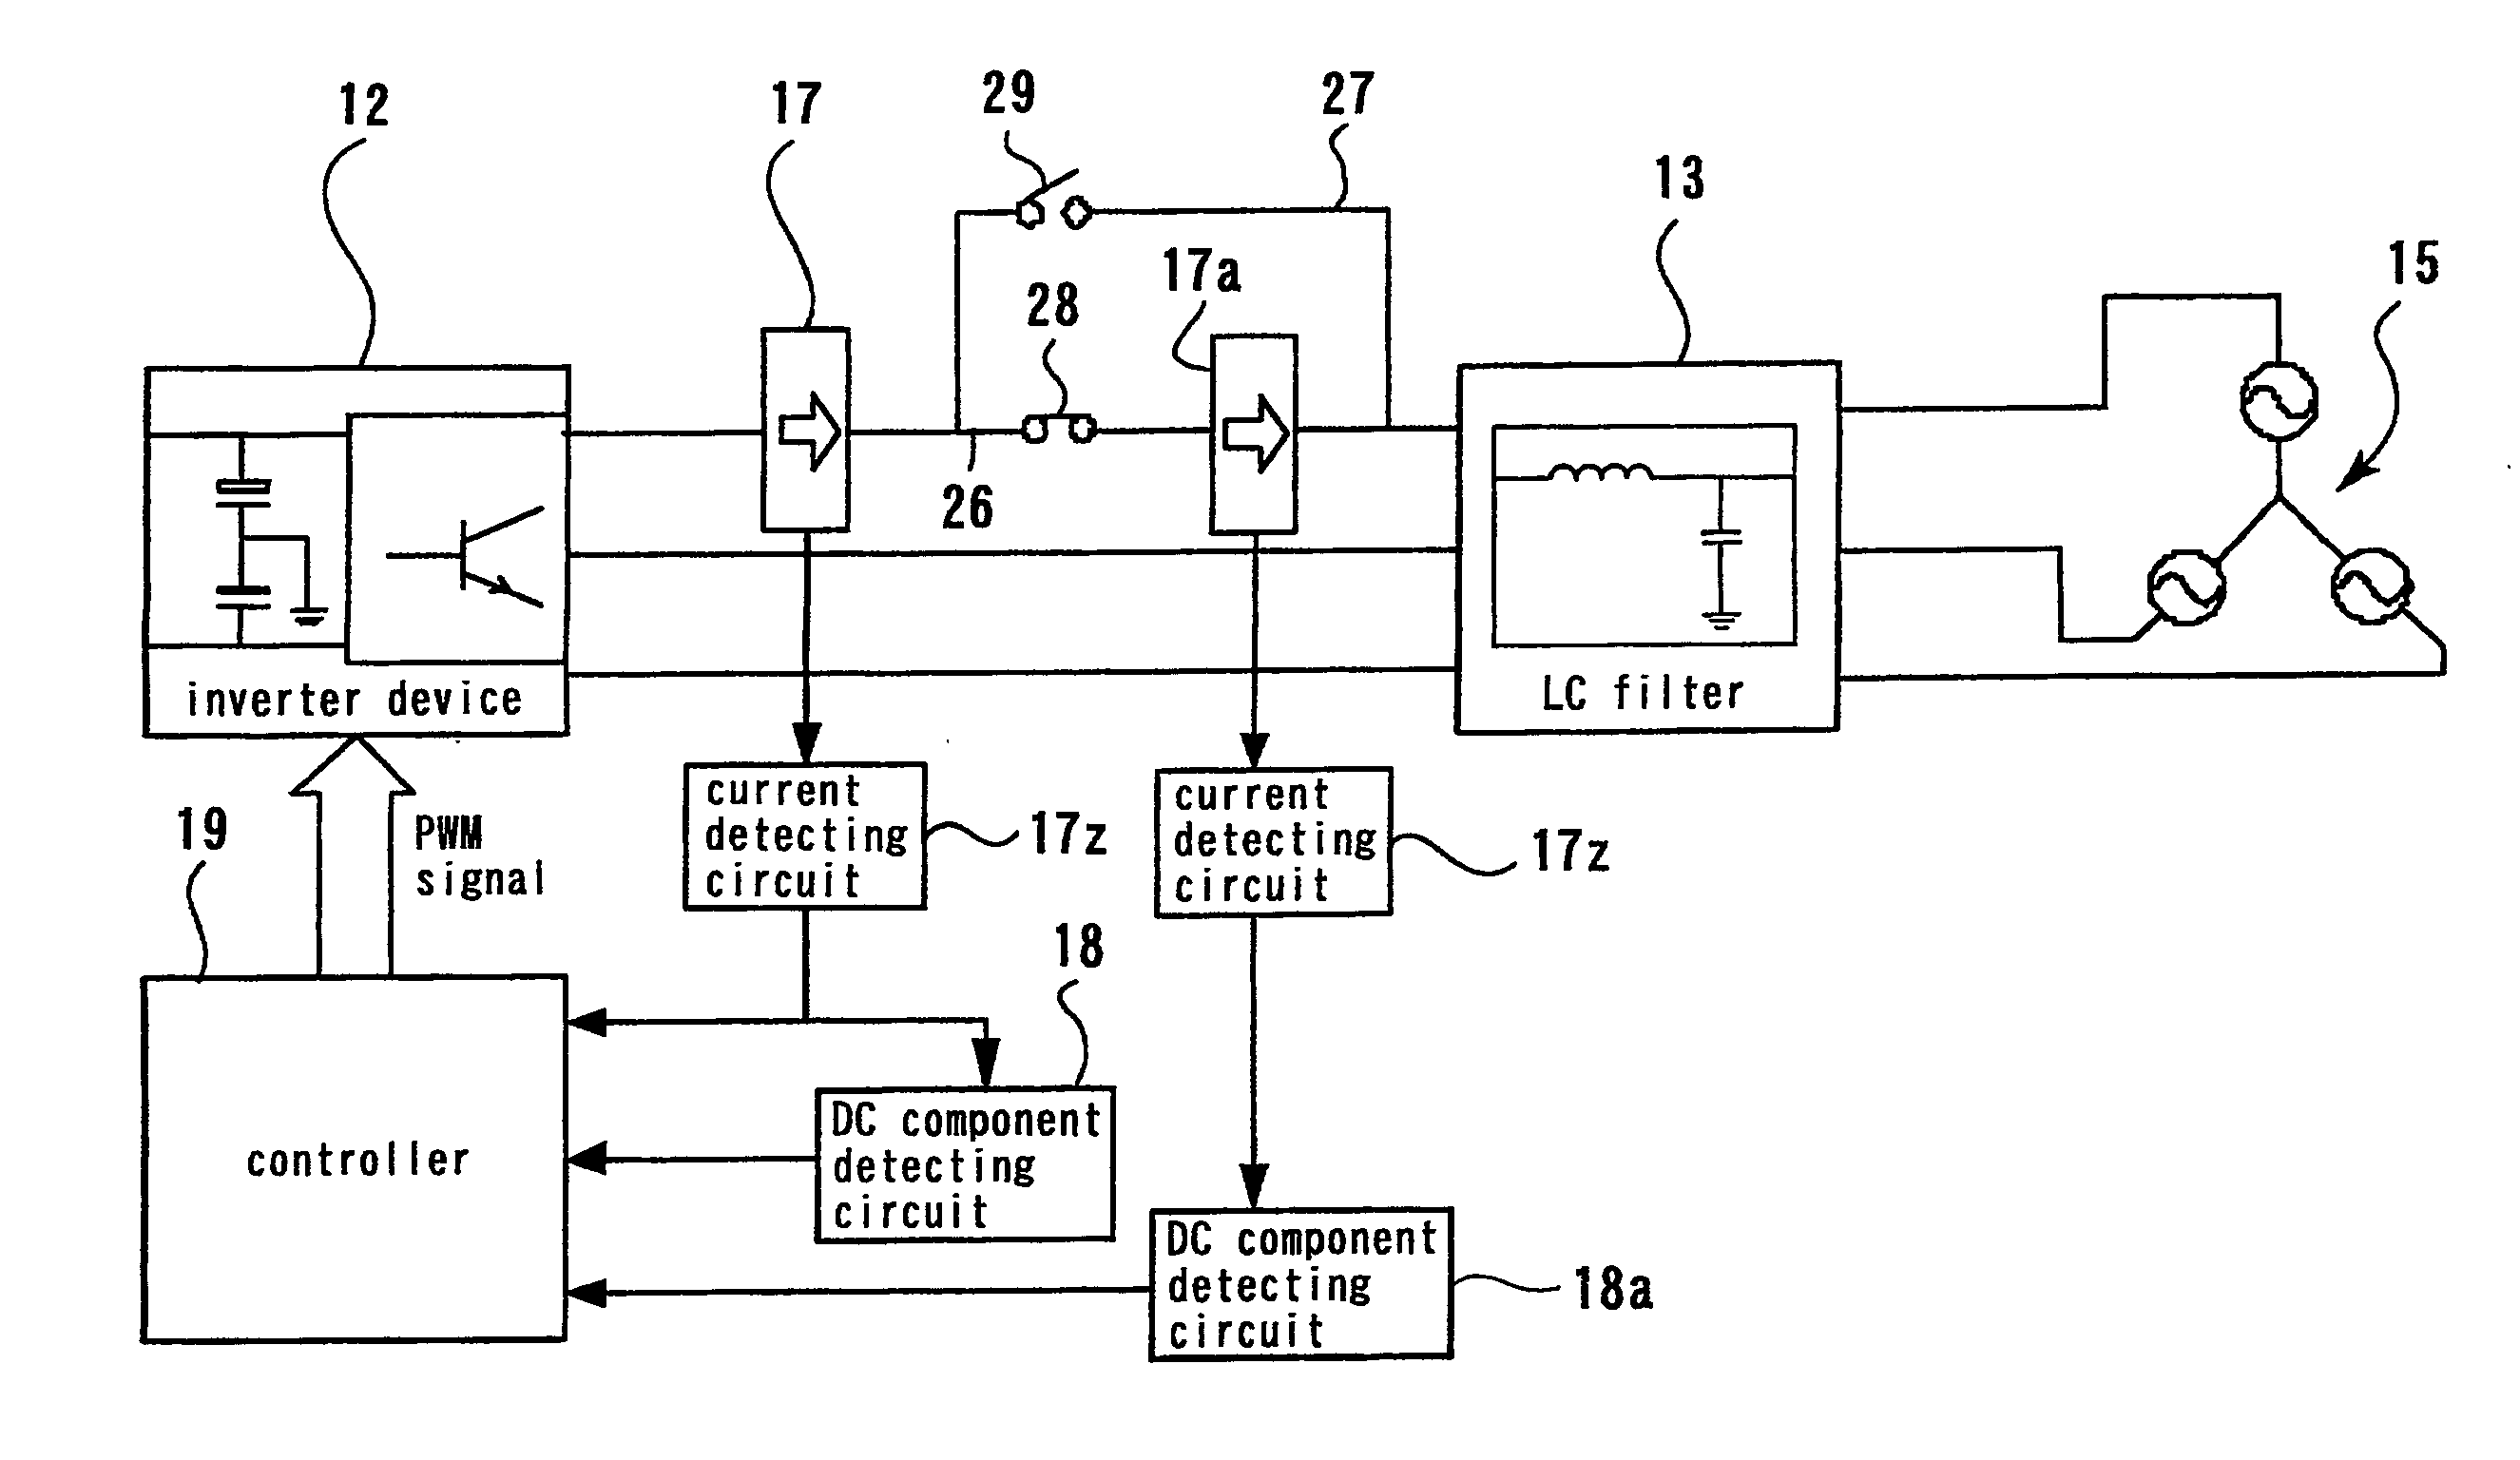 Circuit and system for detecting dc component in inverter device for grid-connection